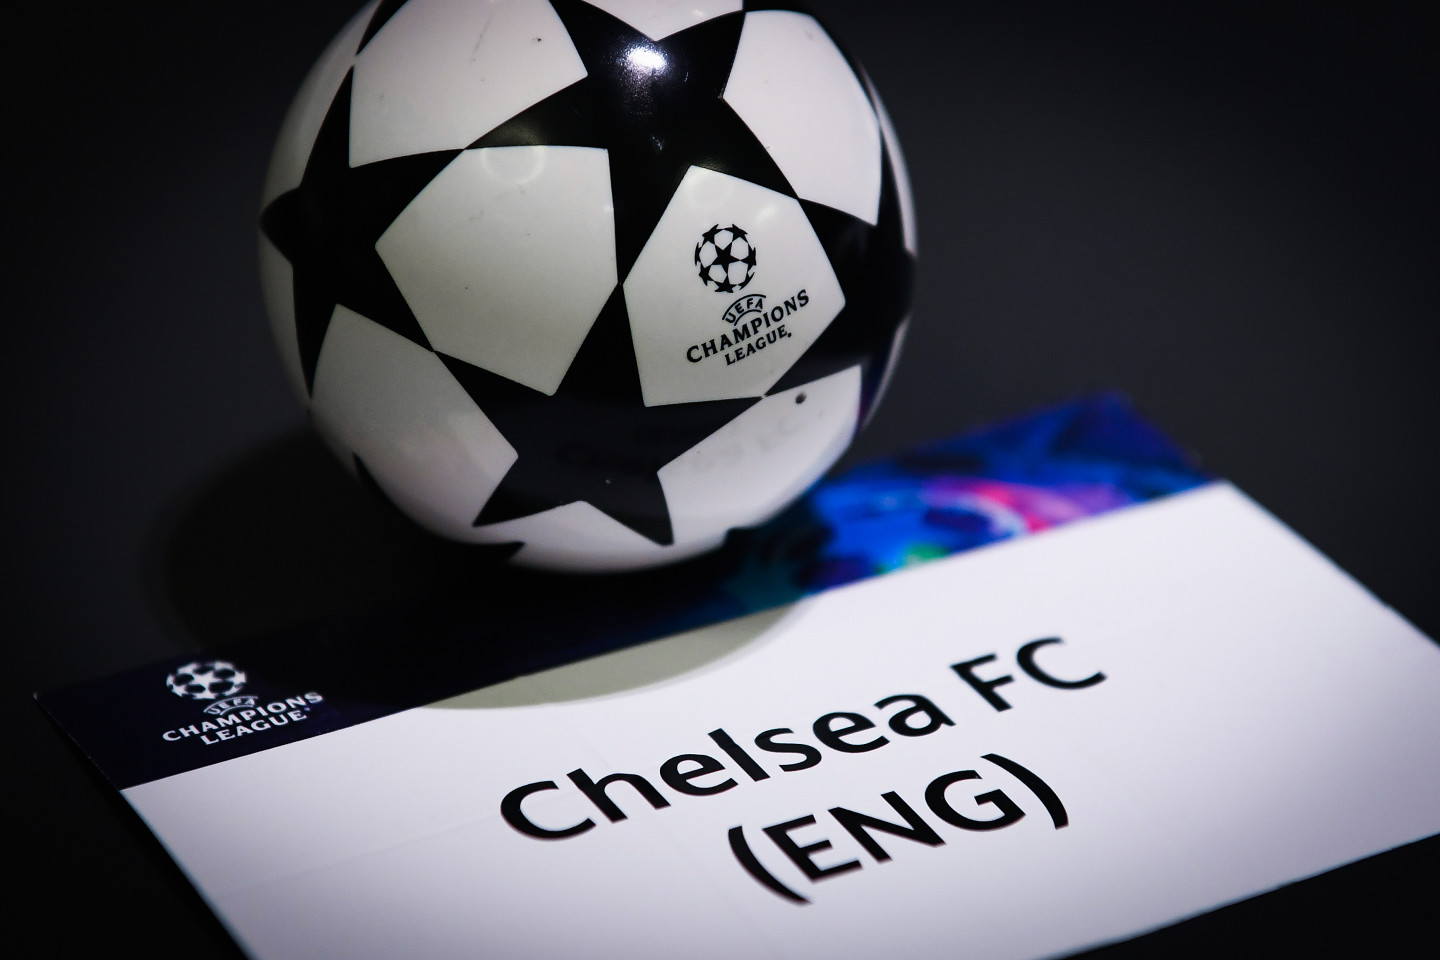 When the Champions League quarter final draw who can Chelsea play? | News | Official | Chelsea Football Club